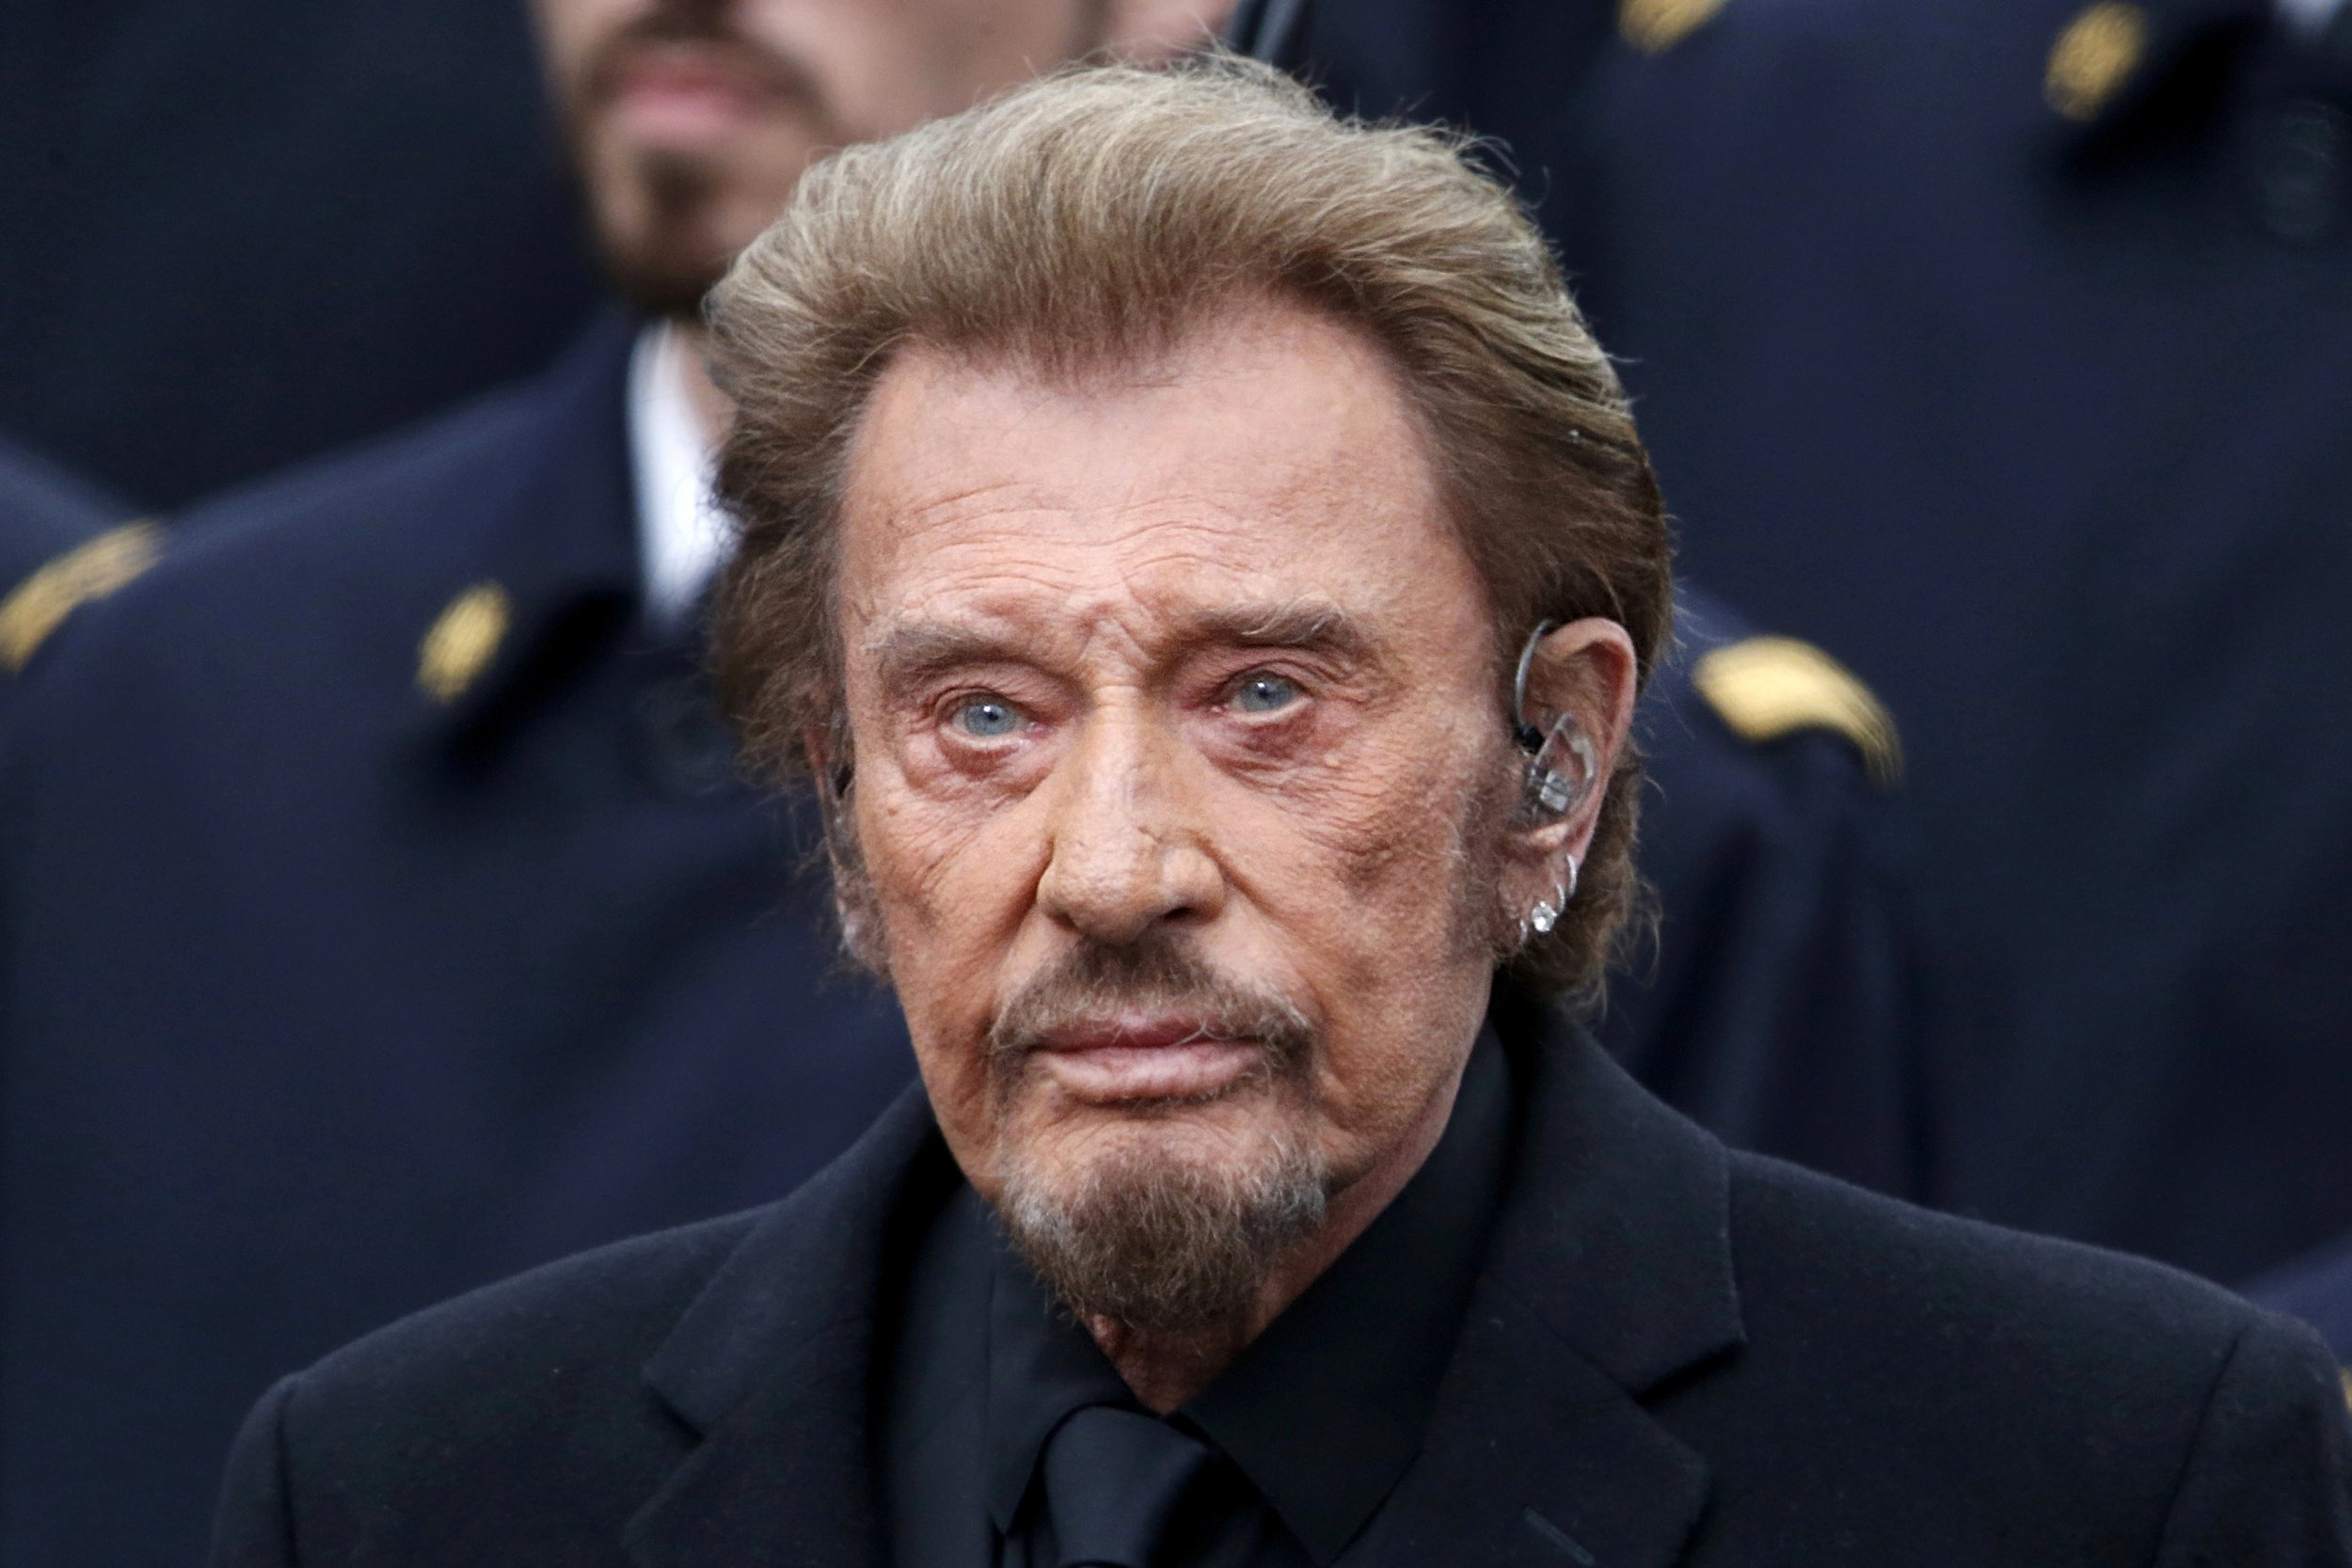 Johnny Hallyday, French Elvis, dead at 74